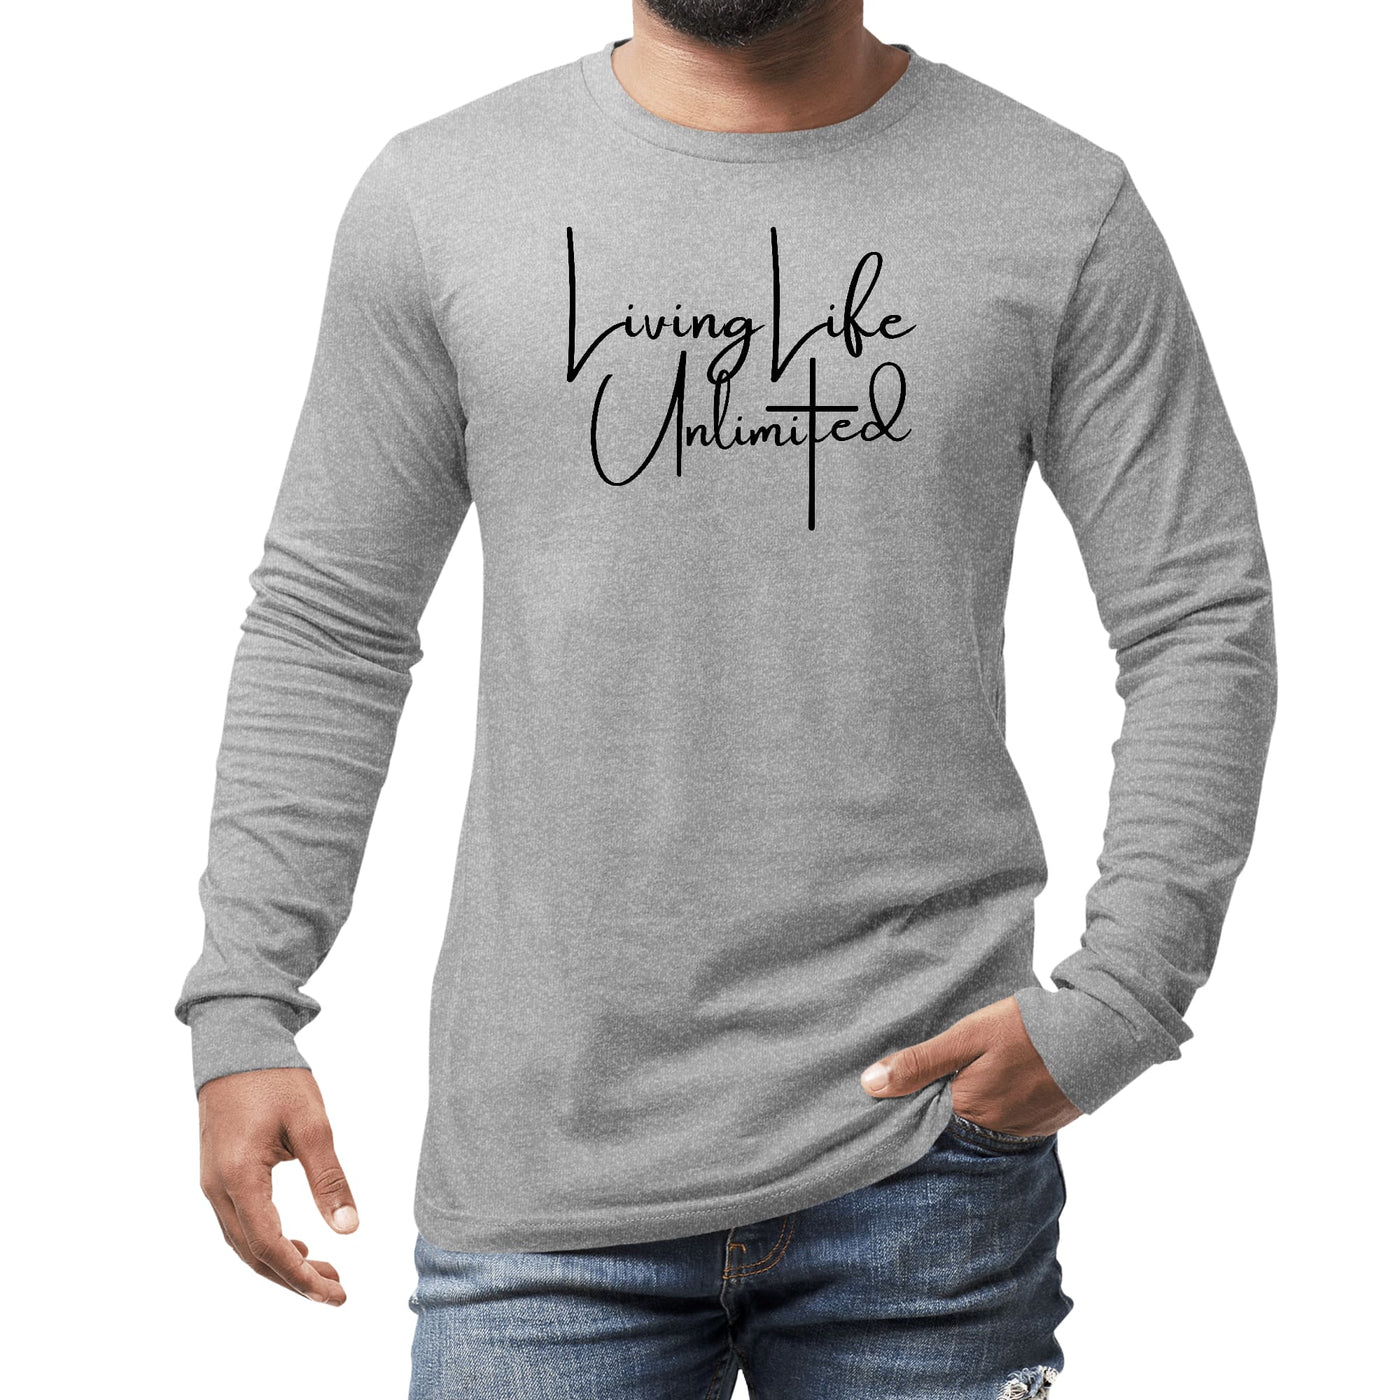 Mens Long Sleeve Graphic T-shirt Living Life Unlimited - Unisex | T-Shirts